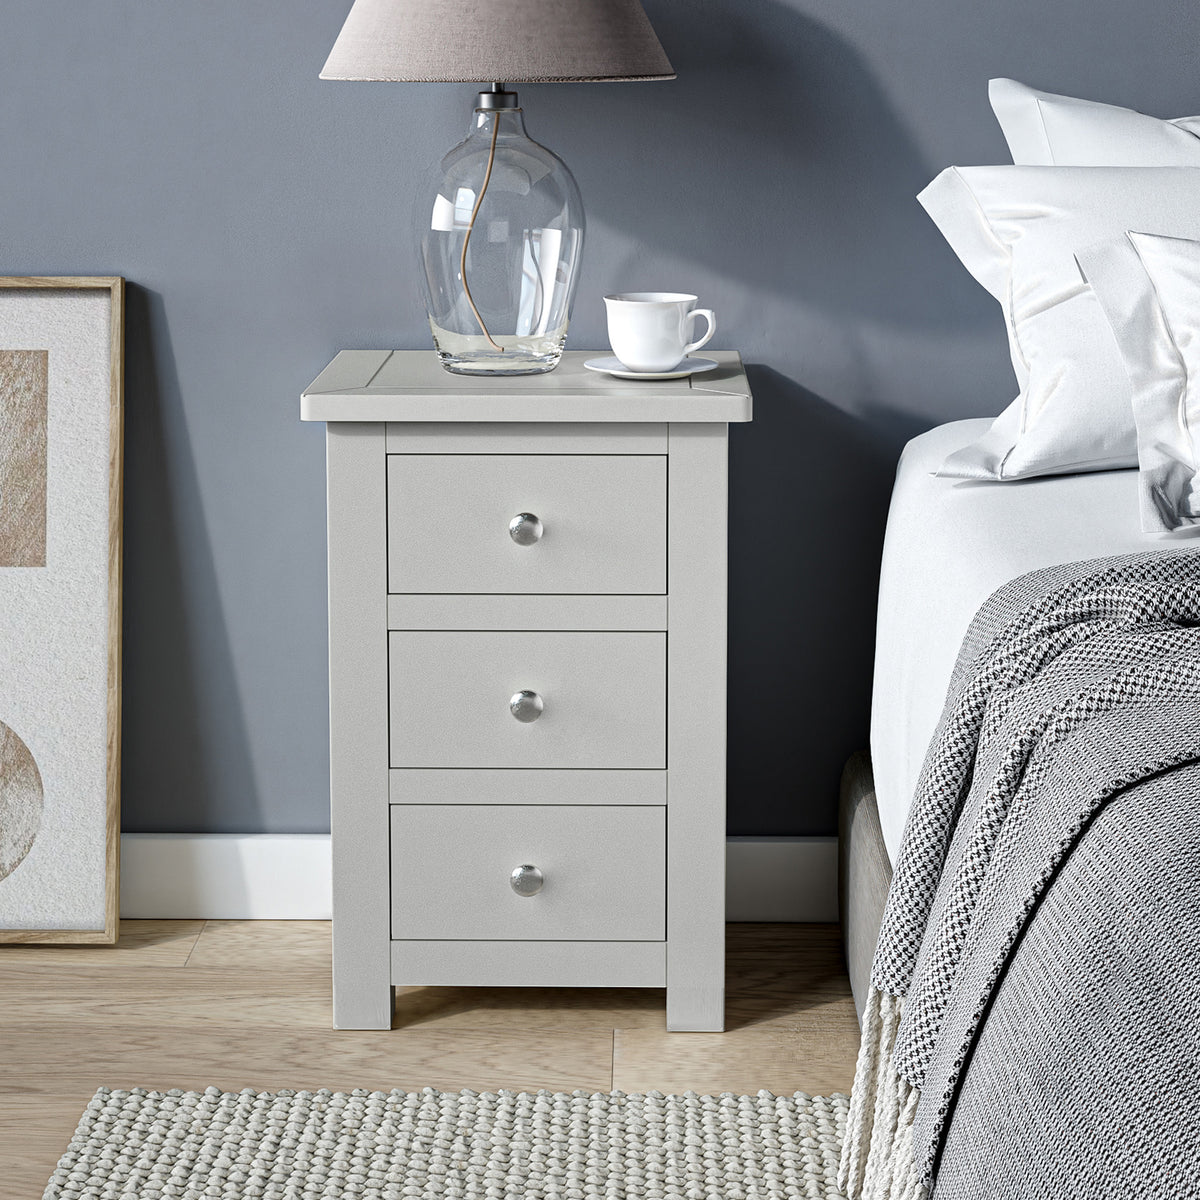 Duchy Inox Grey 3 Drawer Bedside Table for bedroom